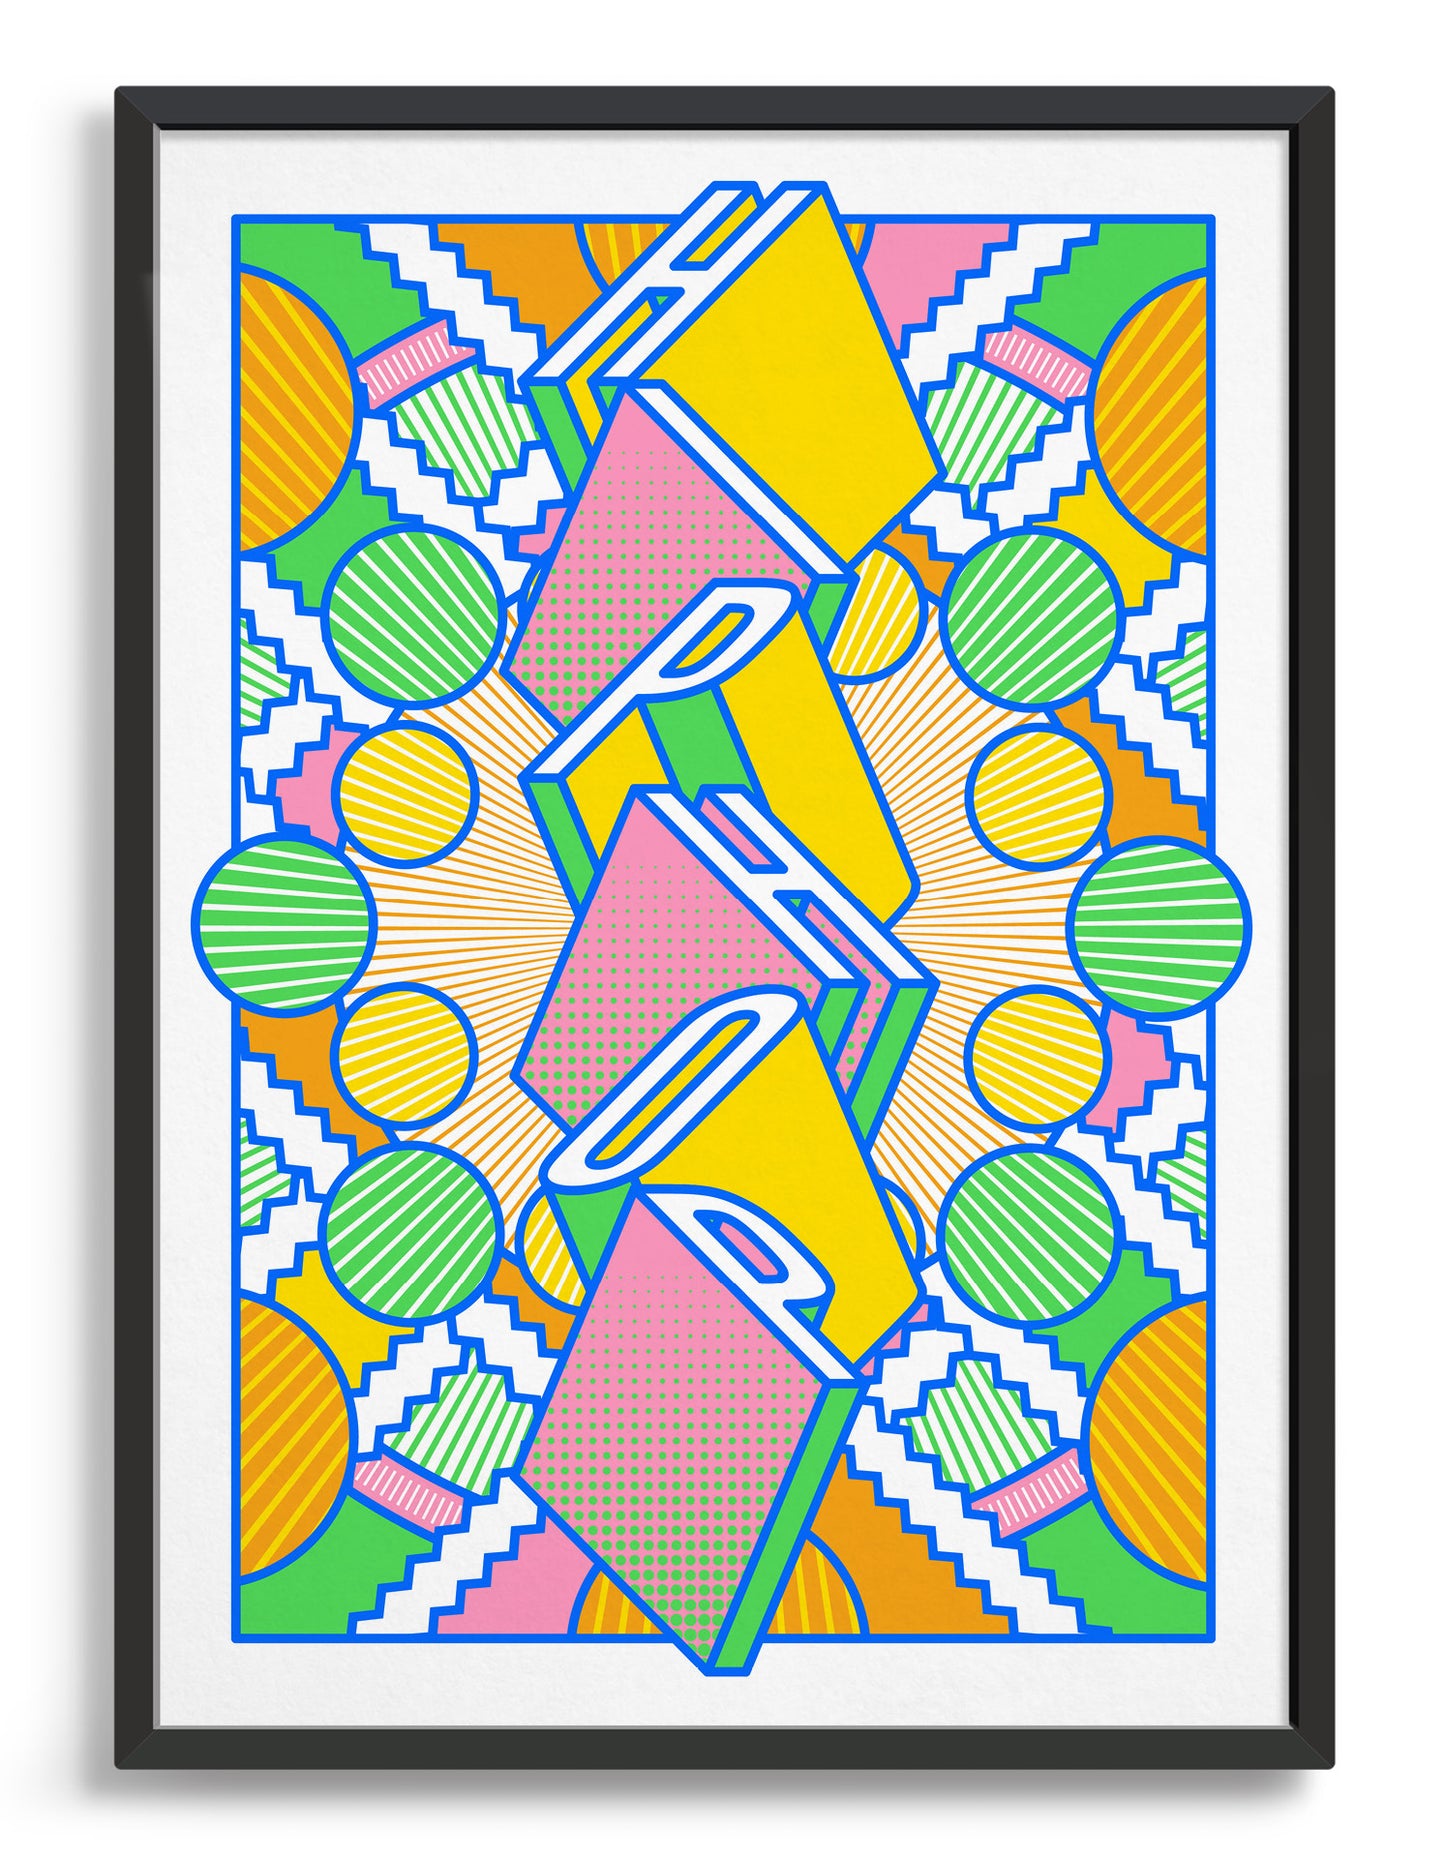 Hiphop music art print featuring a geometric abstract pattern in bold shapes and vibrant rainbow colours. Block typography depicts the word Hiphop in tumbling text